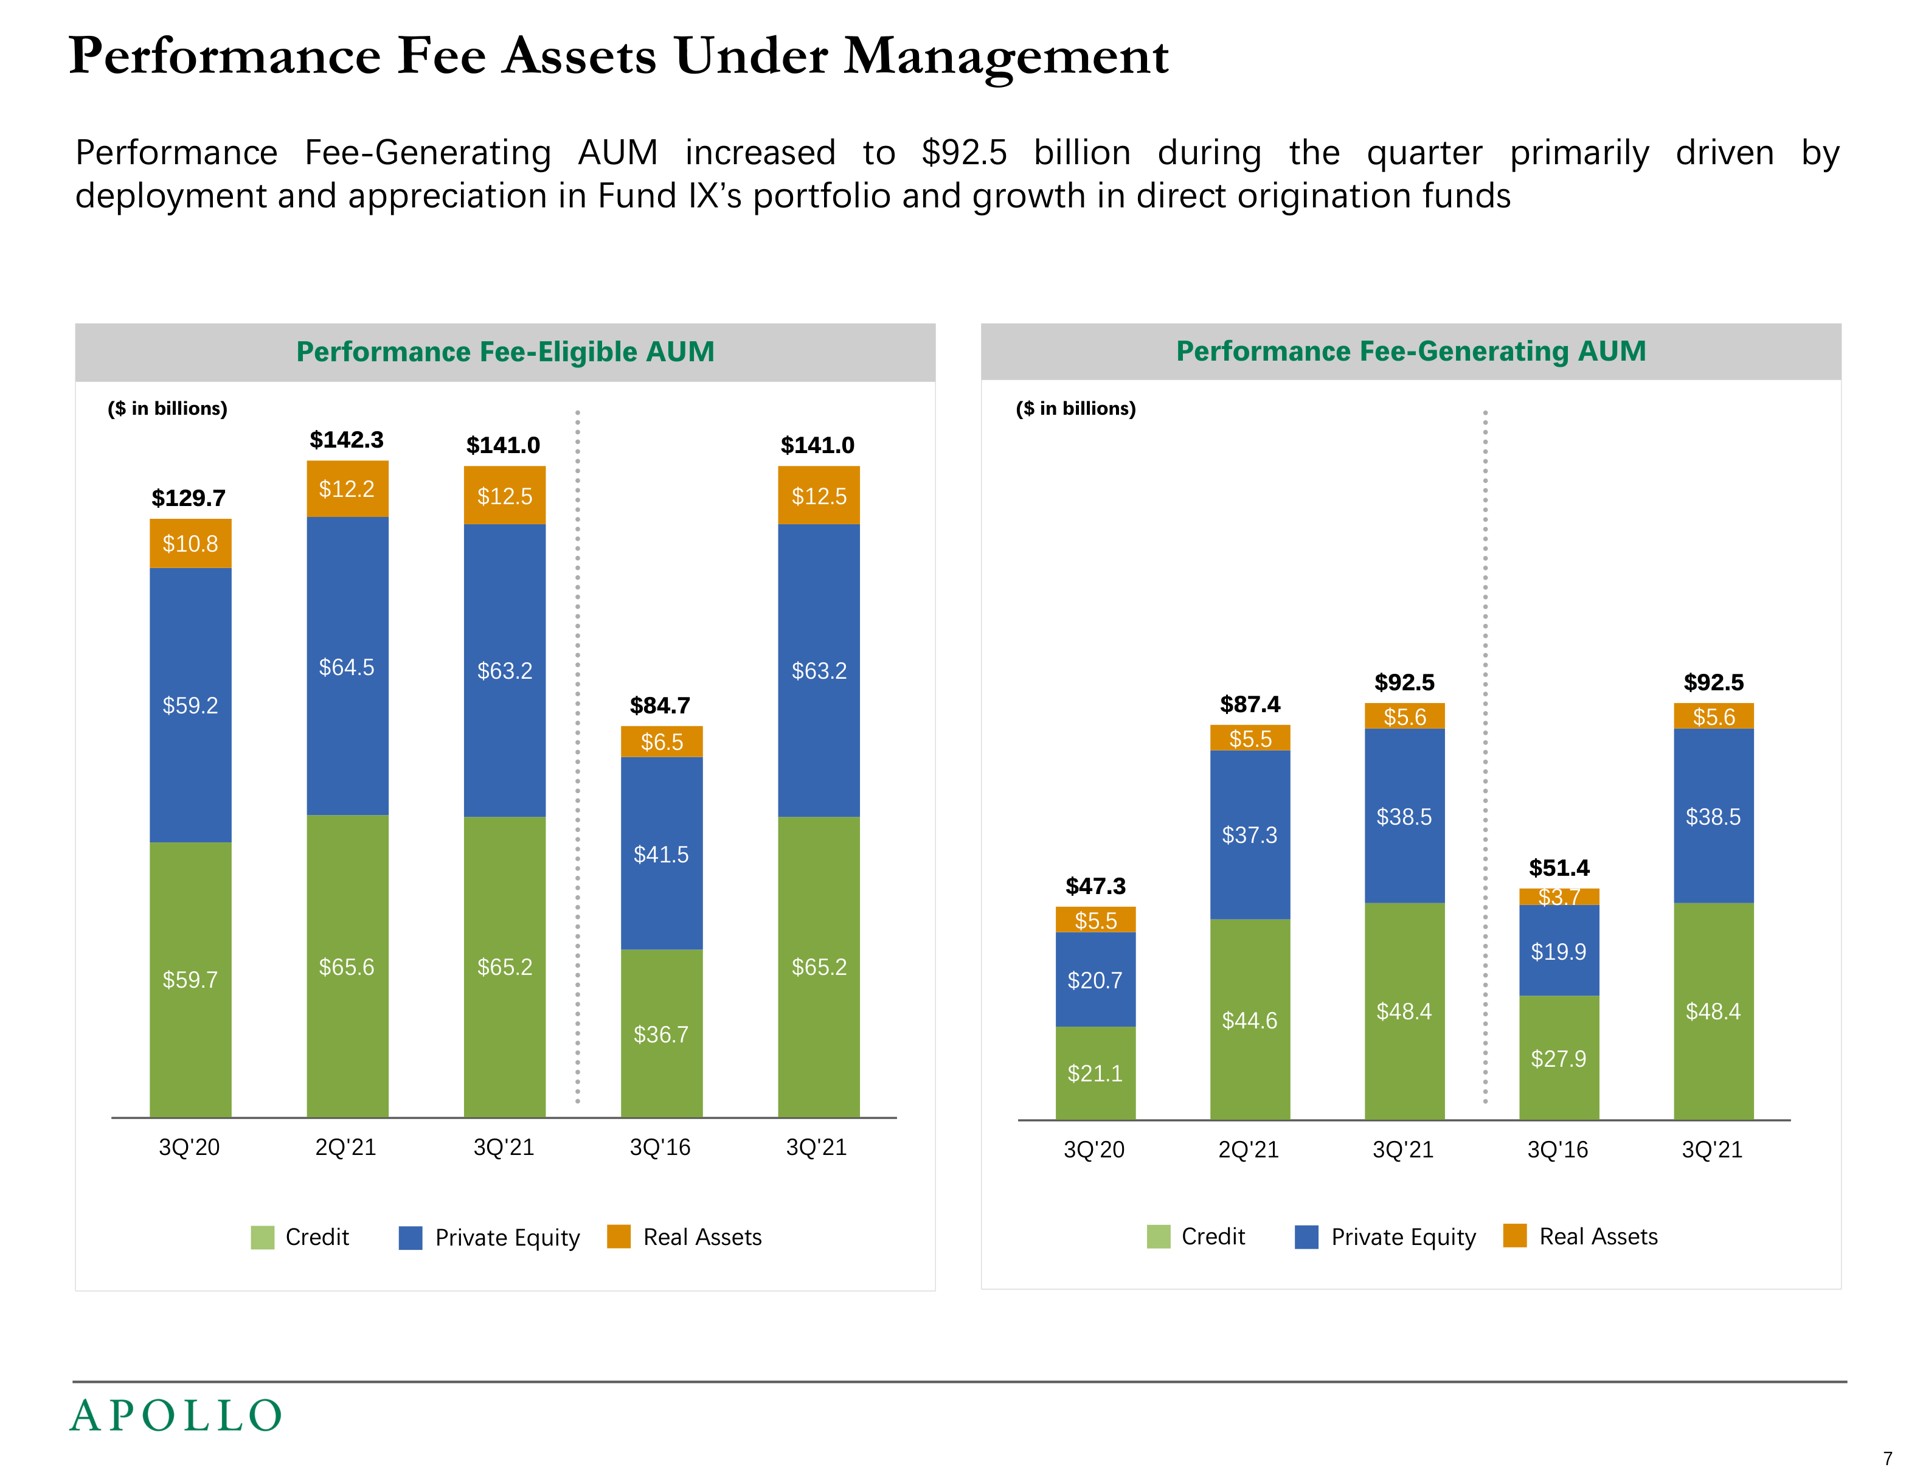 performance fee assets under management performance fee generating aum increased to billion during the quarter primarily driven by deployment and appreciation in fund portfolio and growth in direct origination funds | Apollo Global Management